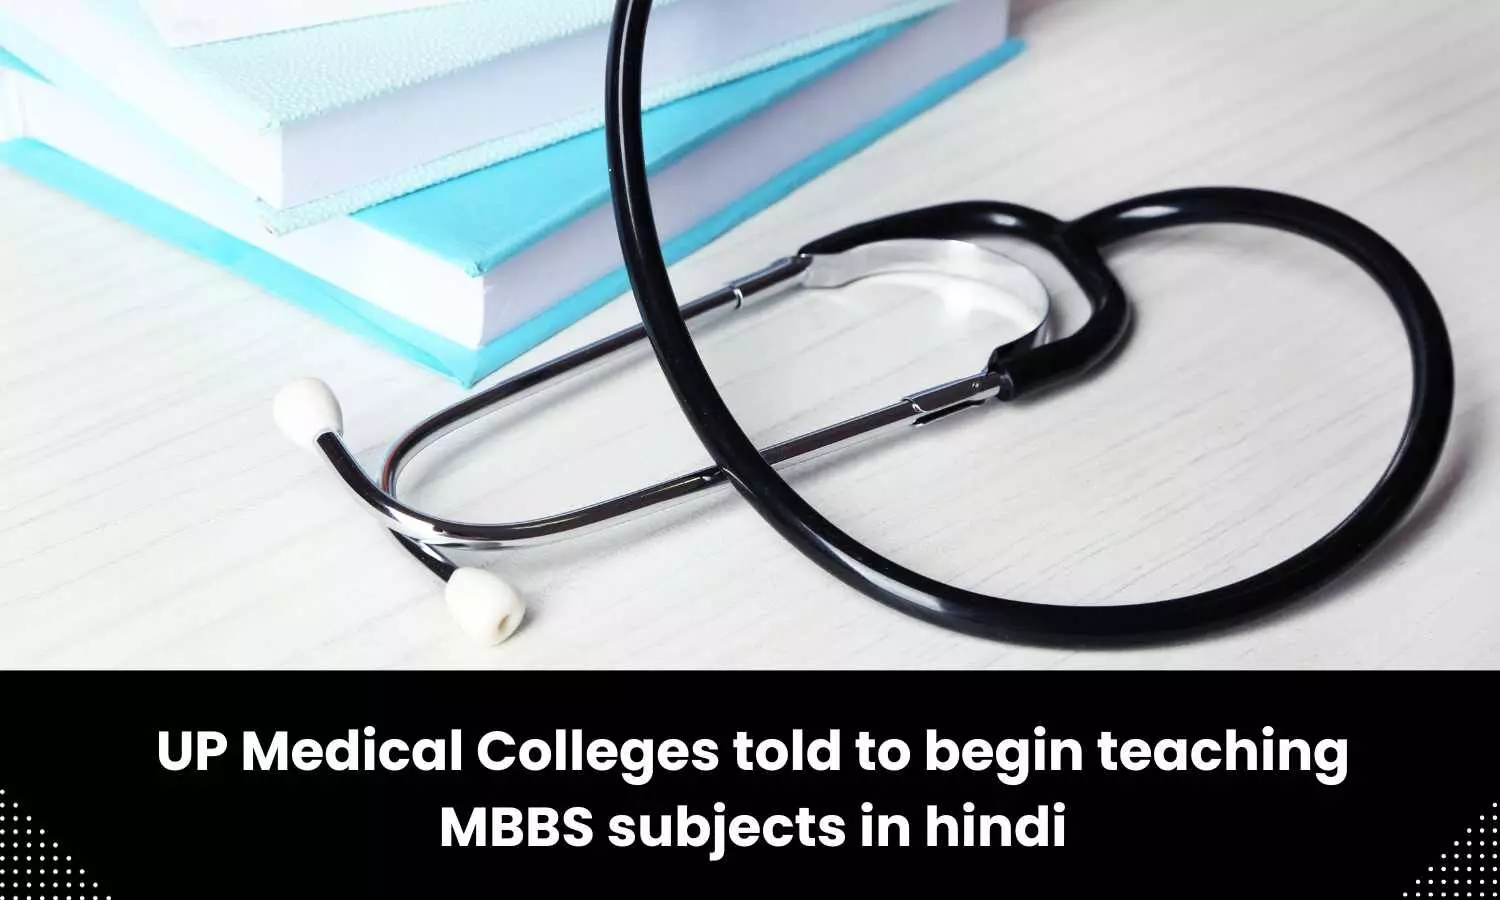 Medical colleges in UP asked to start teaching MBBS subjects in Hindi